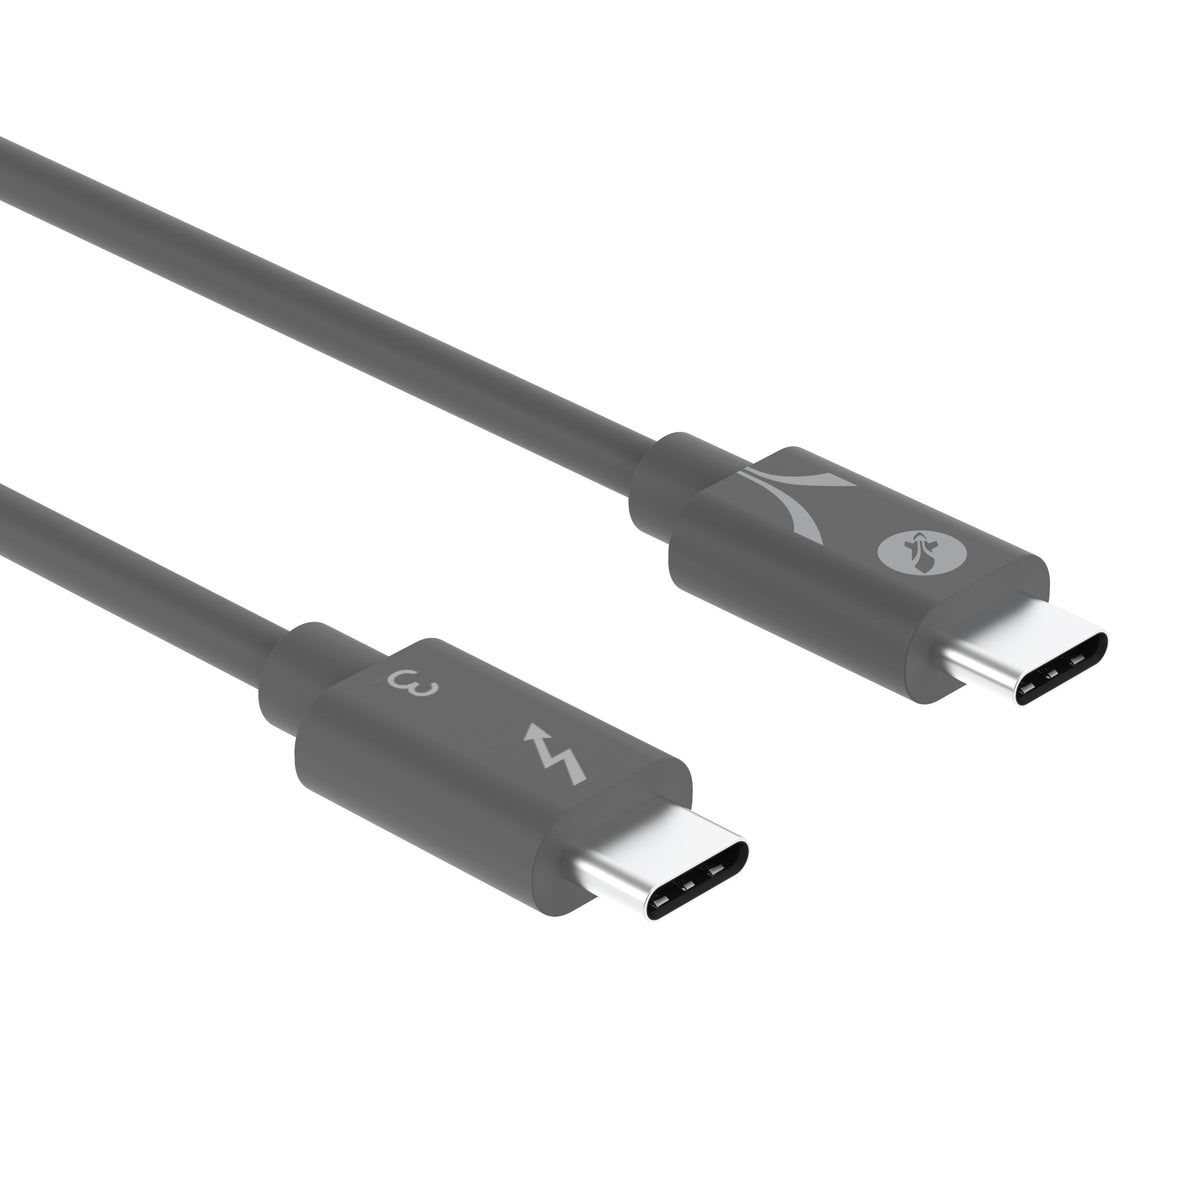 Thunderbolt 3 (Certified) USB Type-C Cable